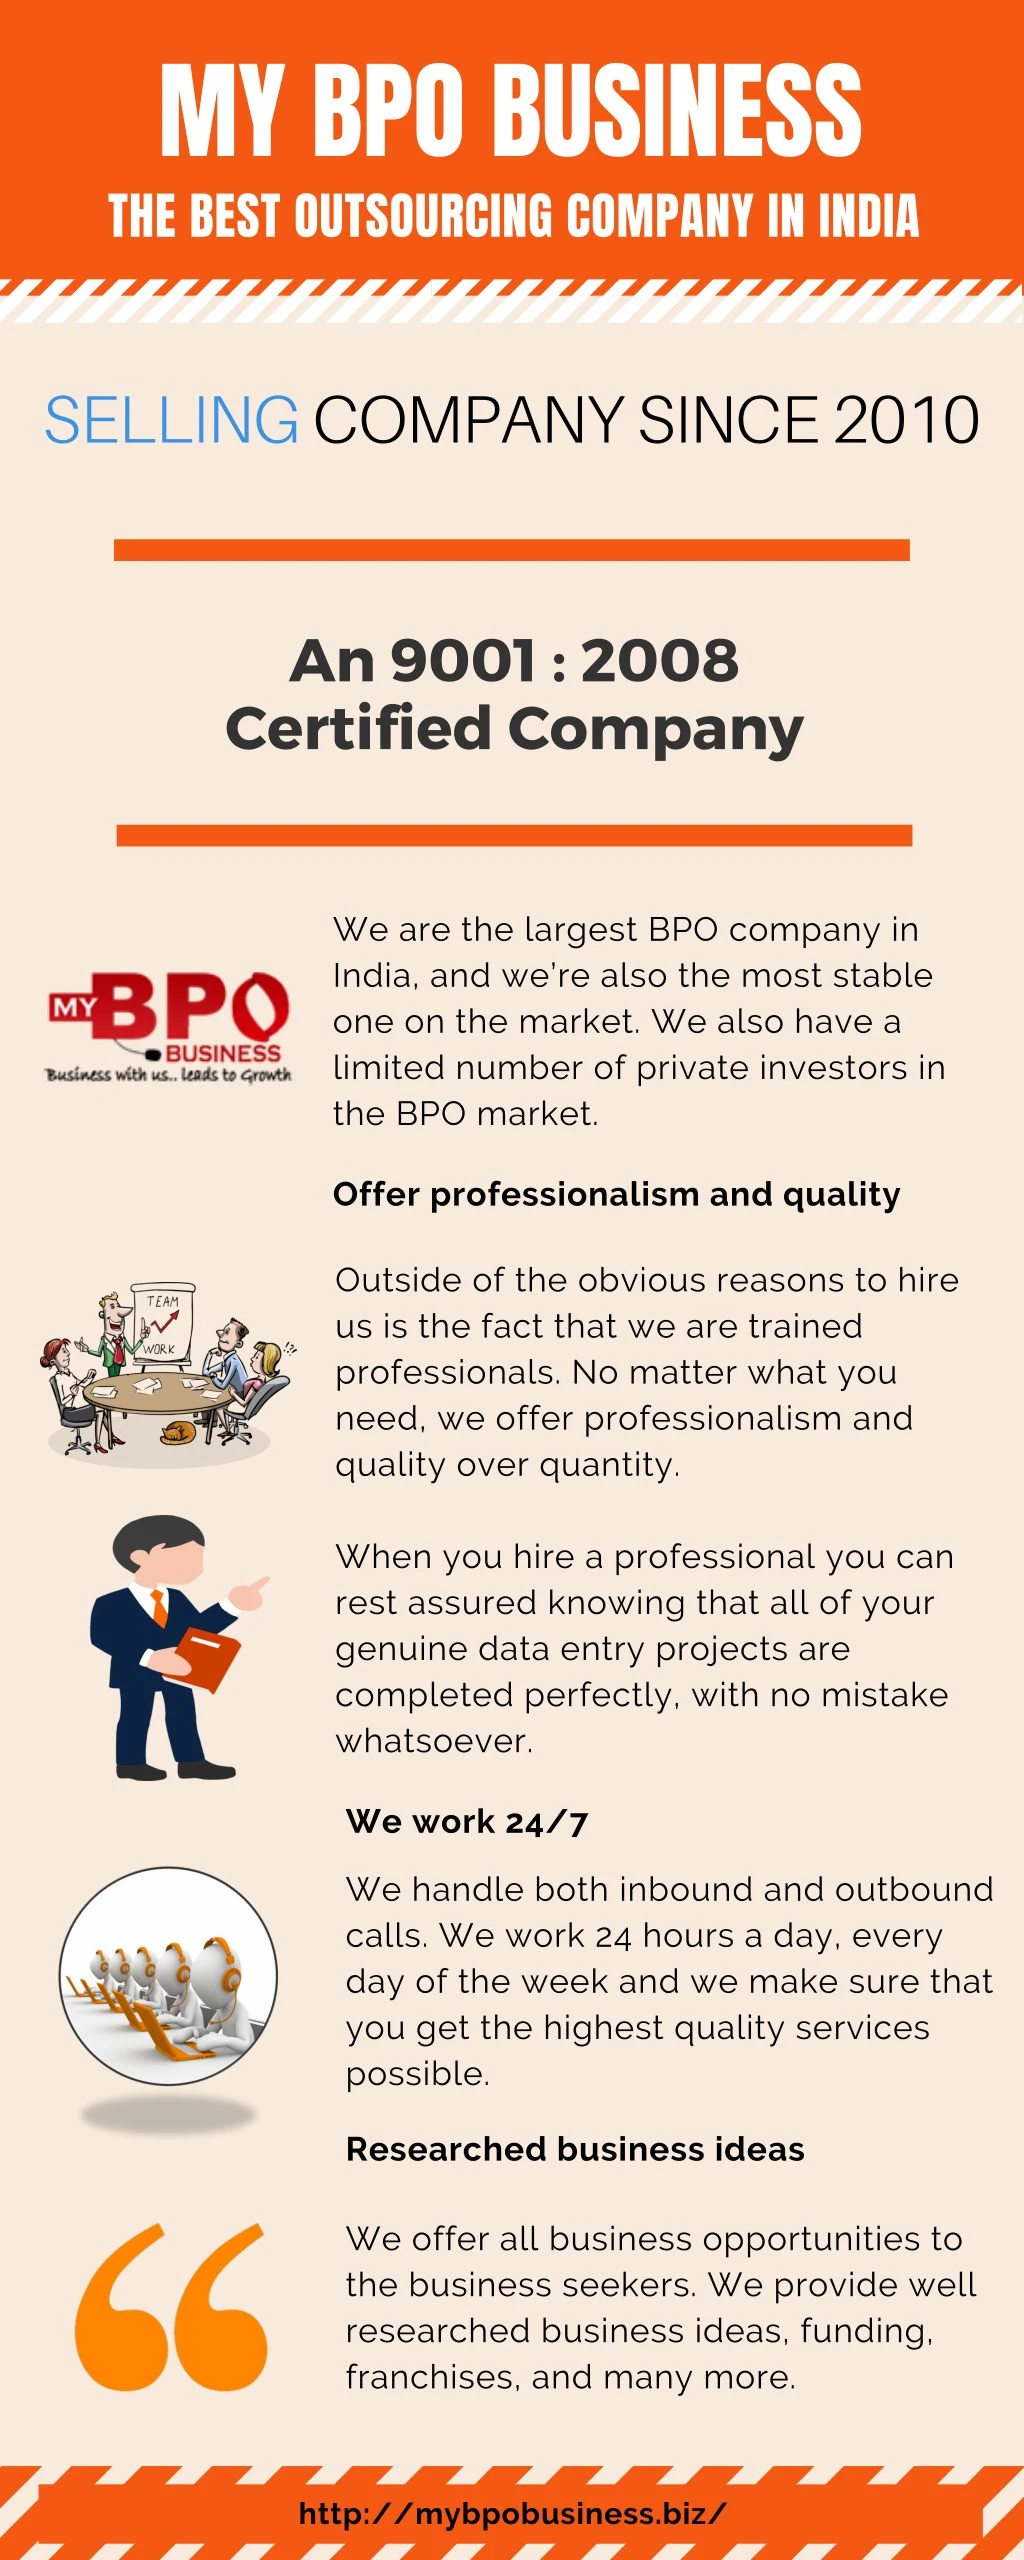 my bpo business the best outsourcing company